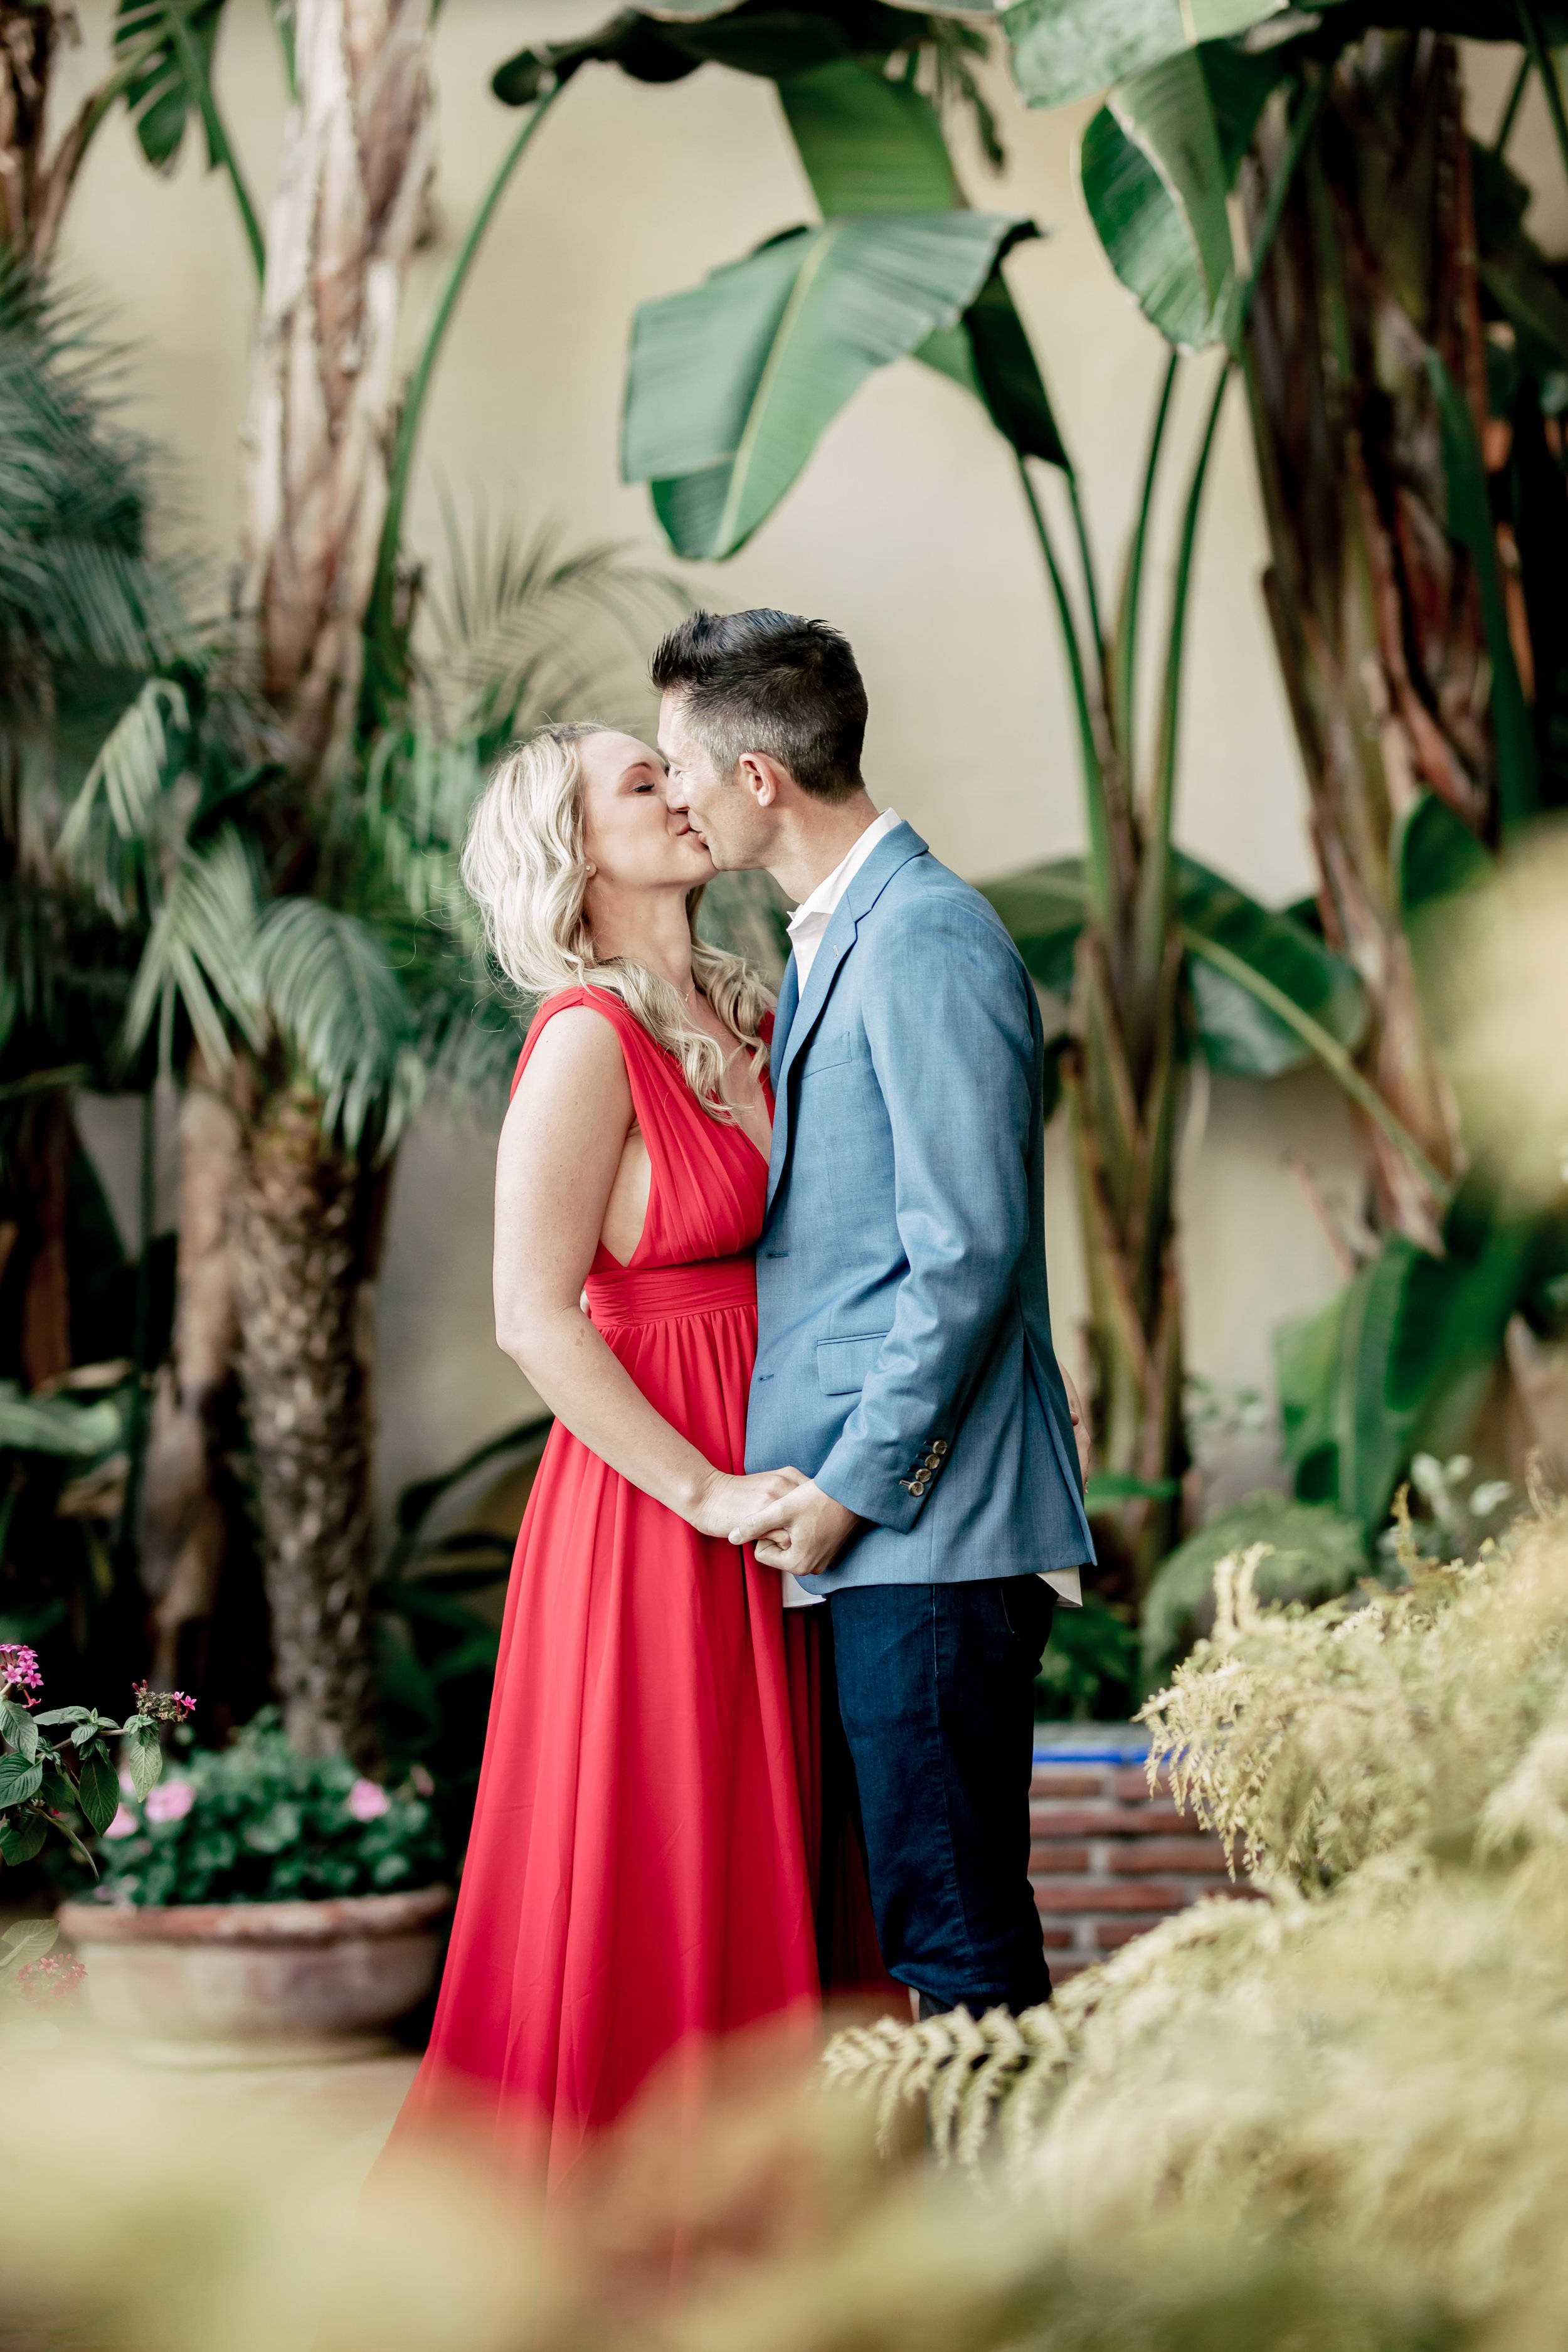 santabarbarawedding.com | Rewind Photography | Butterfly Beach | Engaged Couple In Tropical Garden